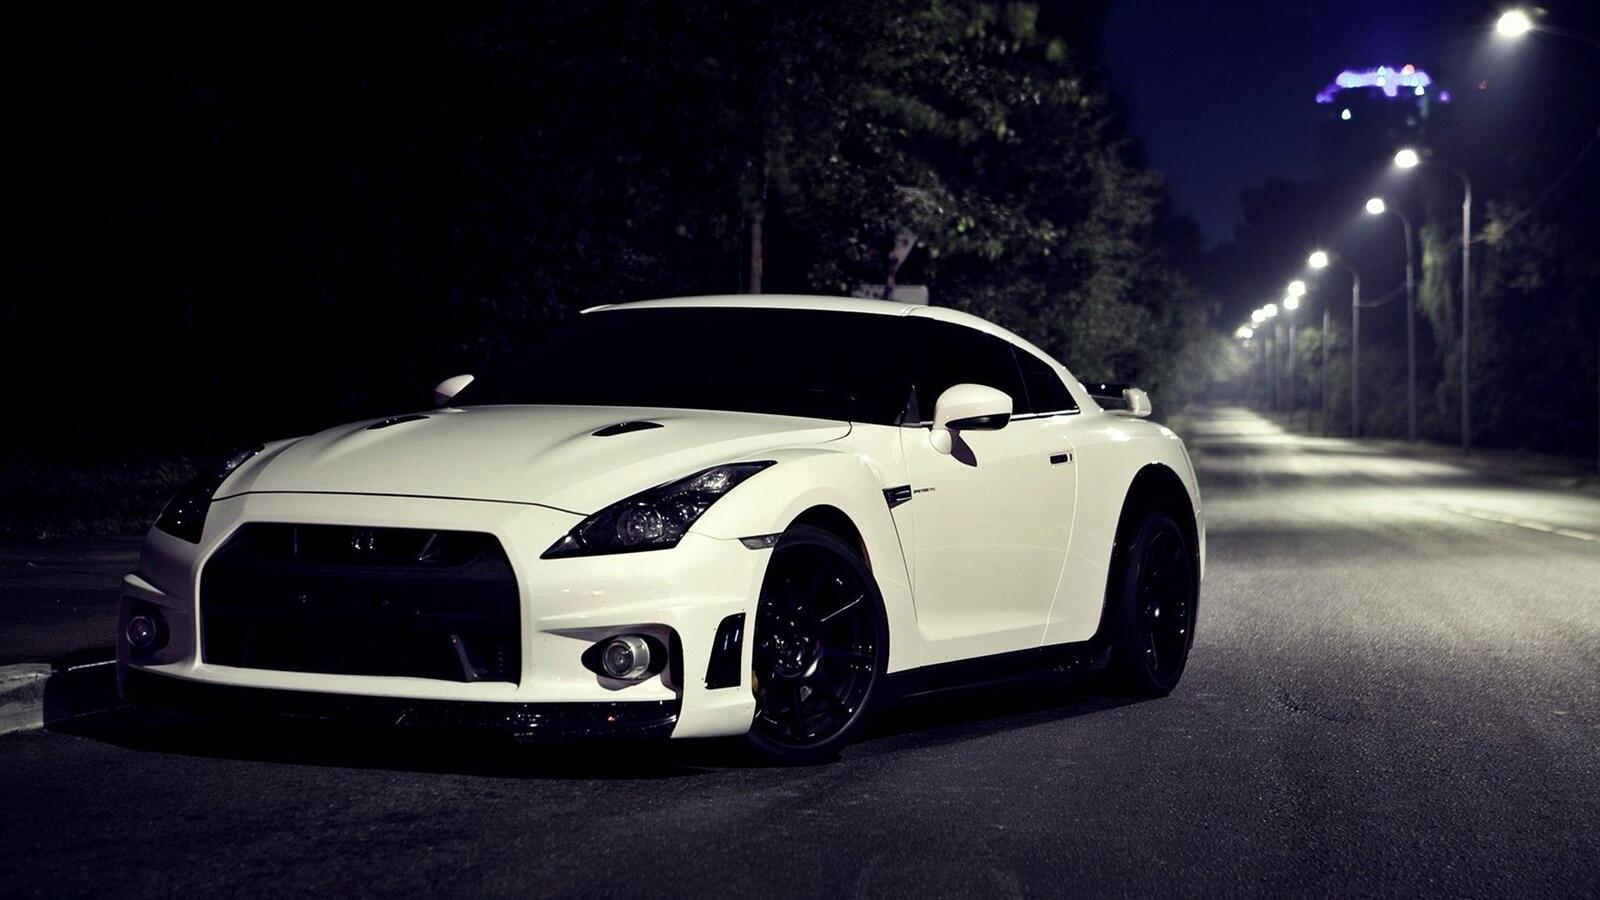 Free photo Cool picture with white Nissan GTR for desktop